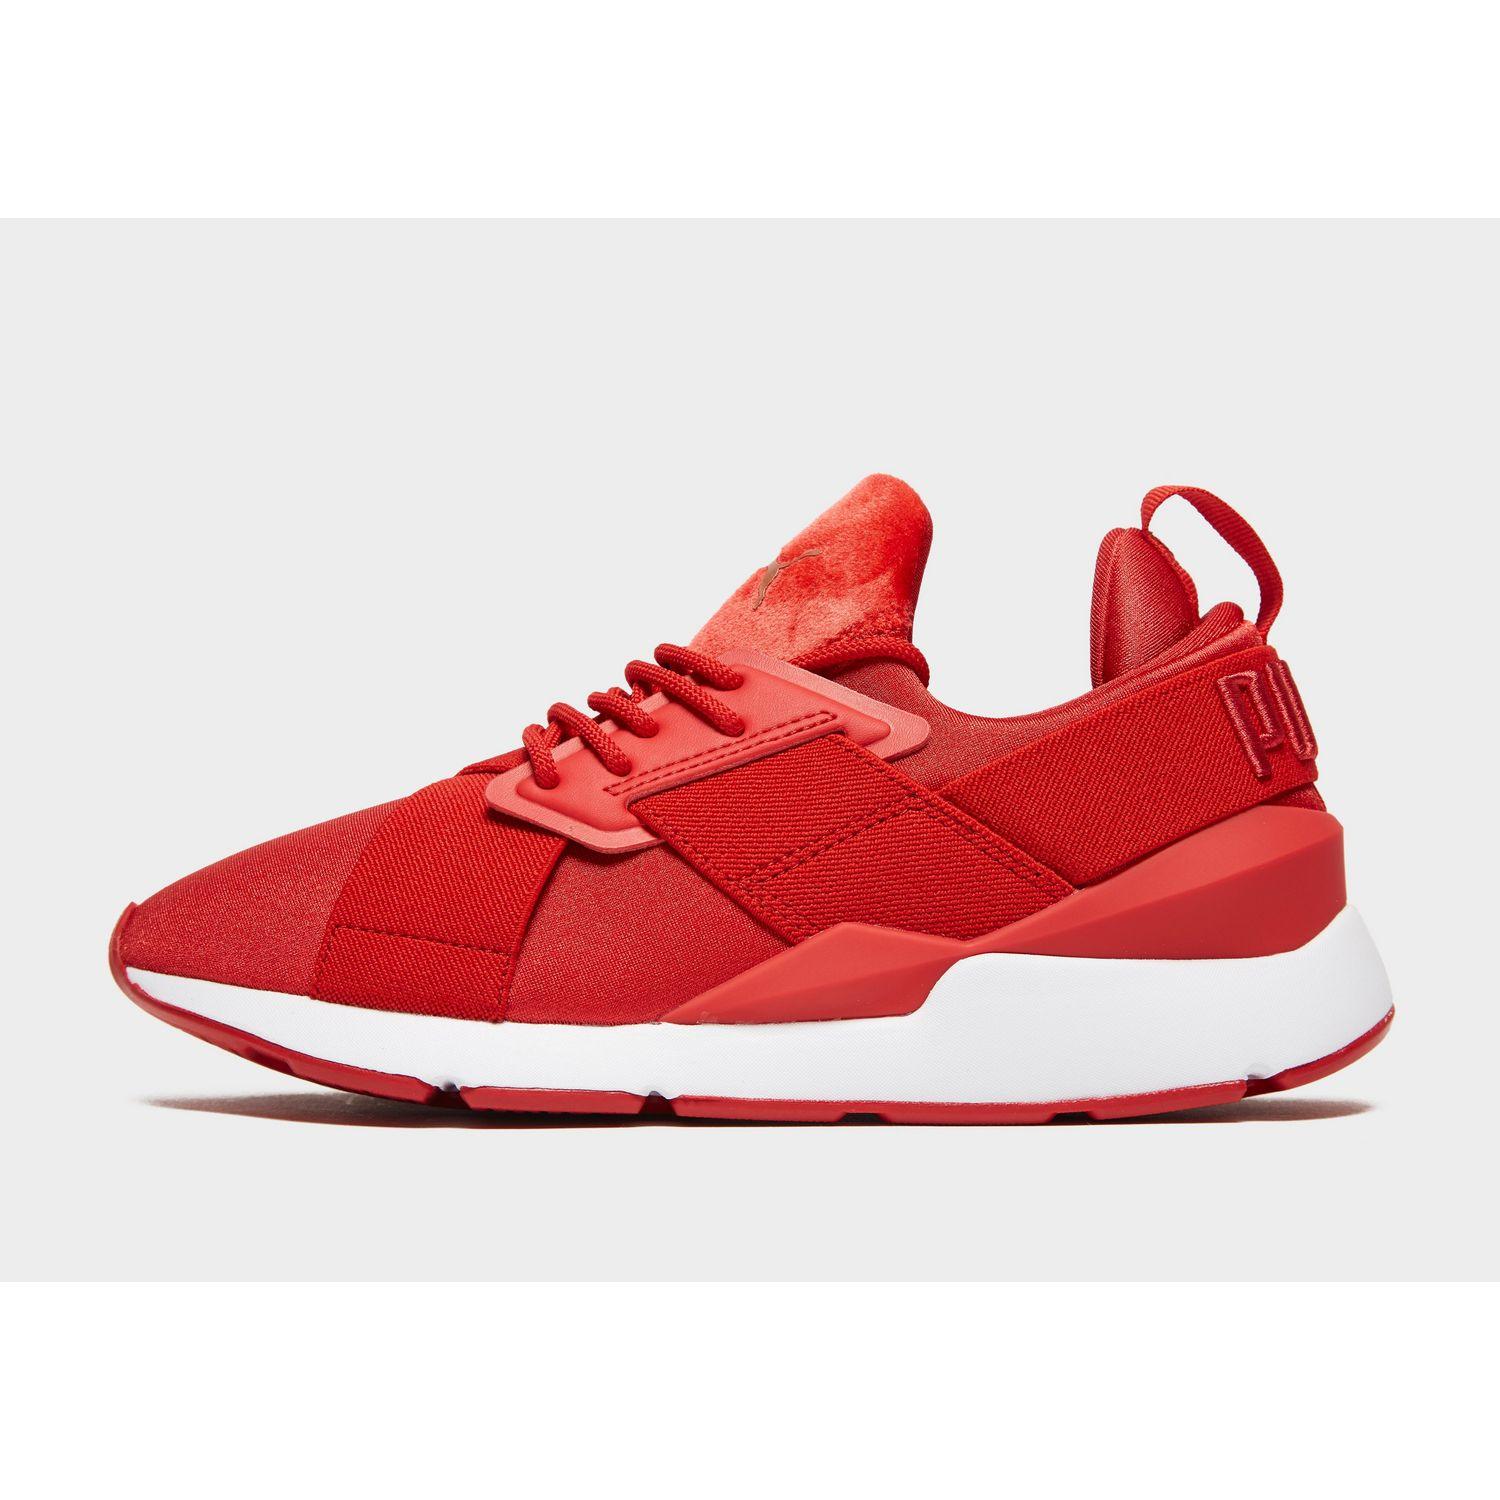 PUMA Muse Satin Ii in Red/White (Red 